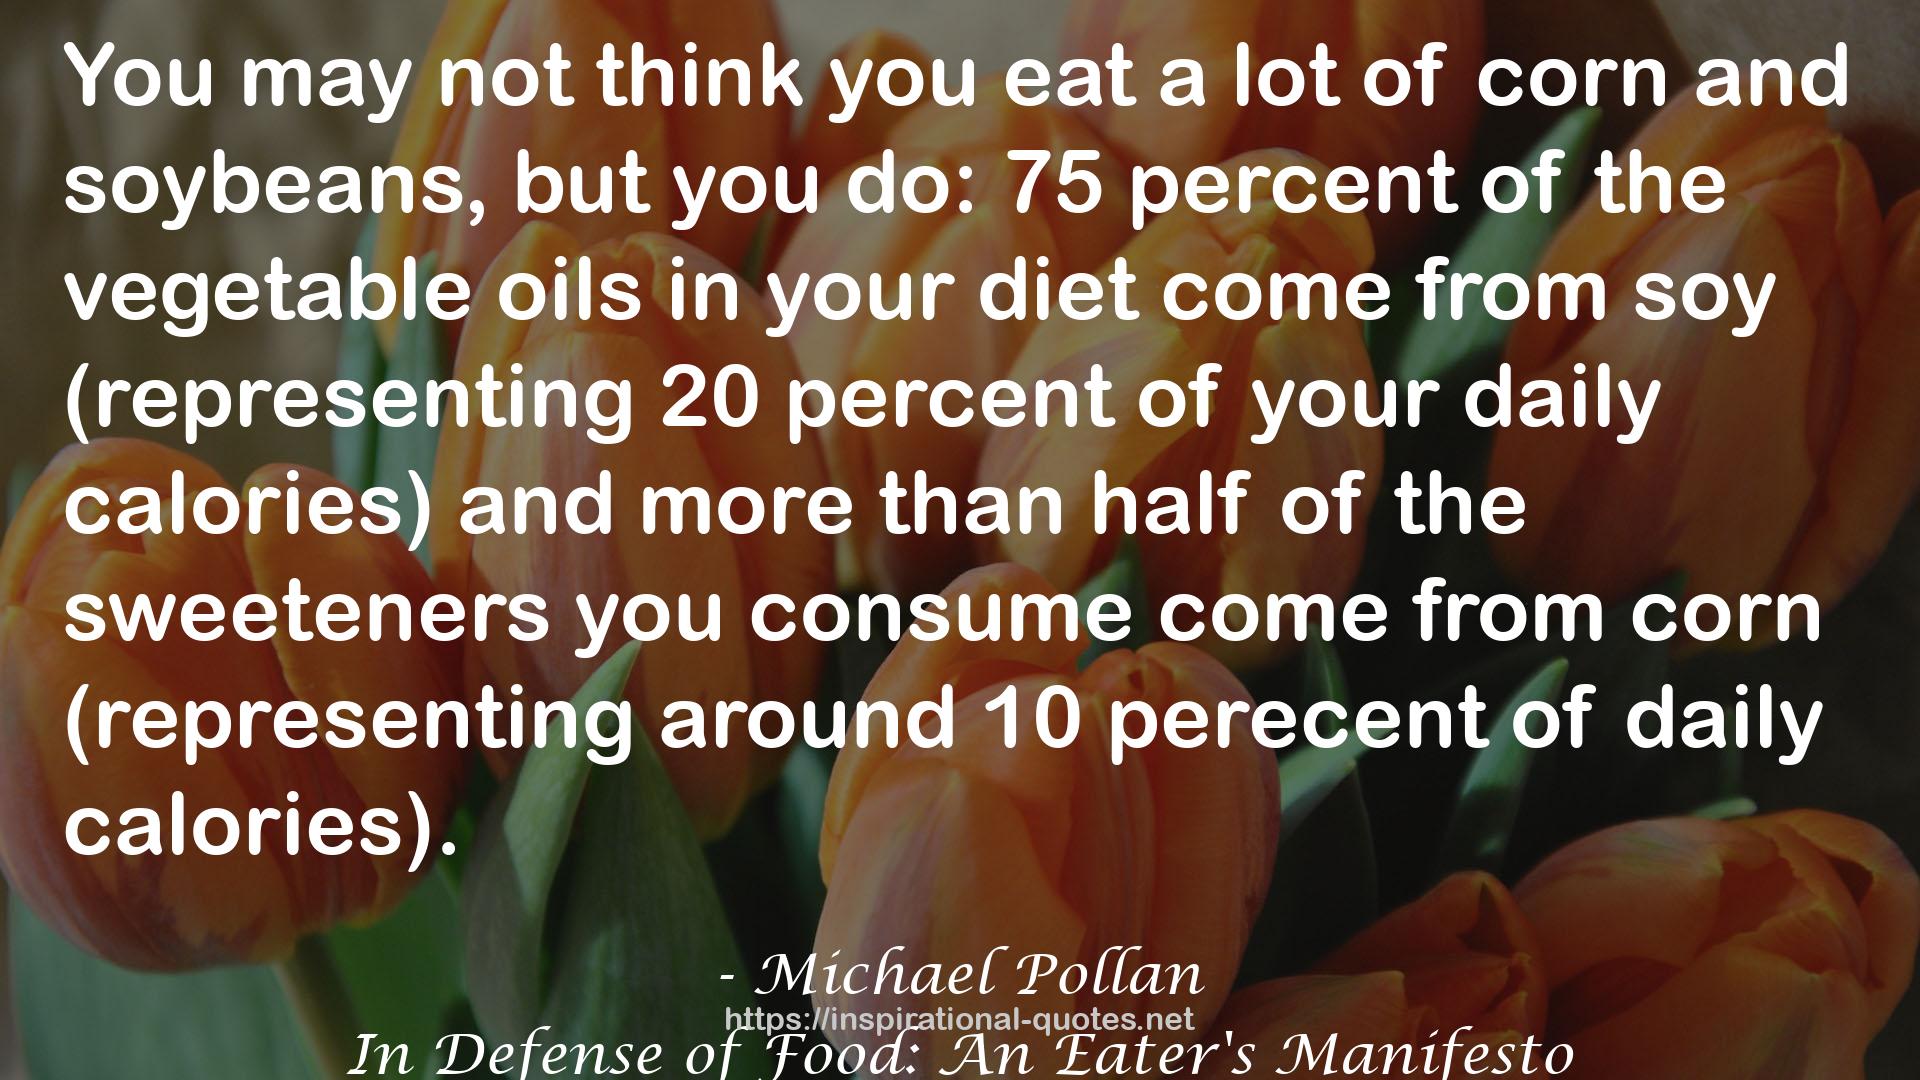 In Defense of Food: An Eater's Manifesto QUOTES